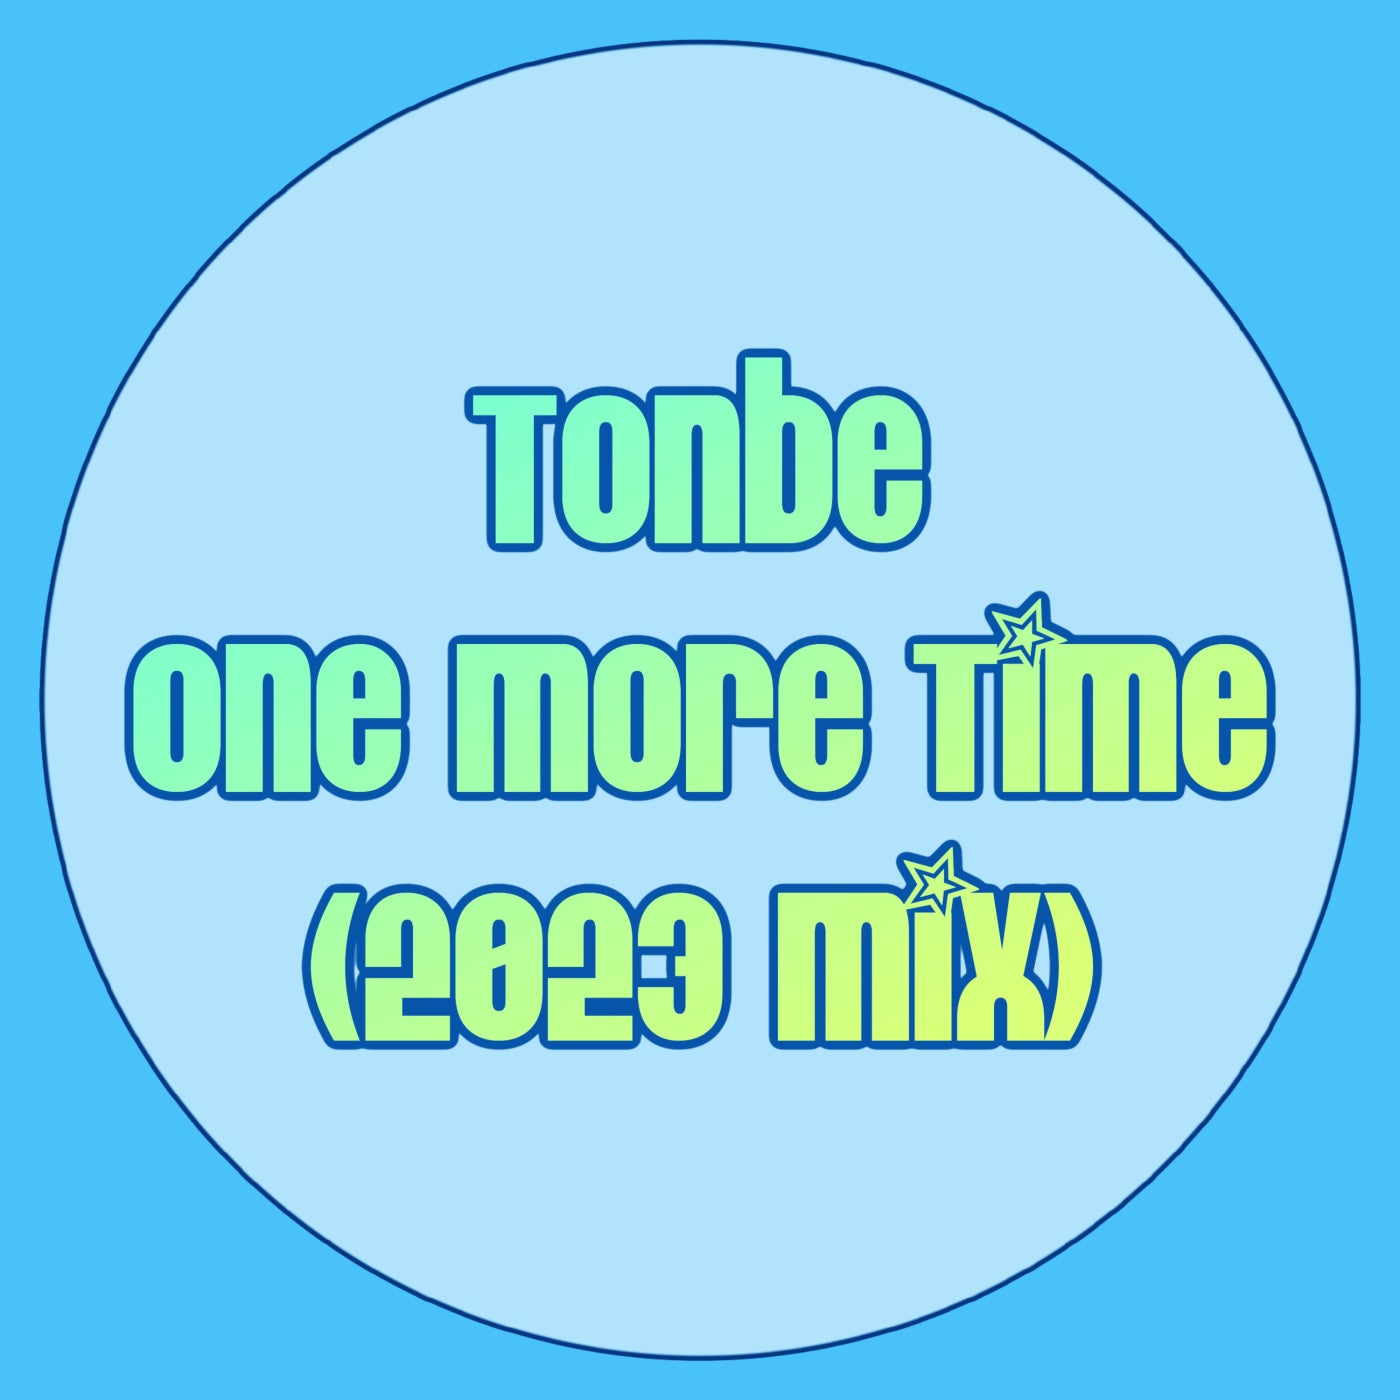 One More Time (2023 Mix)